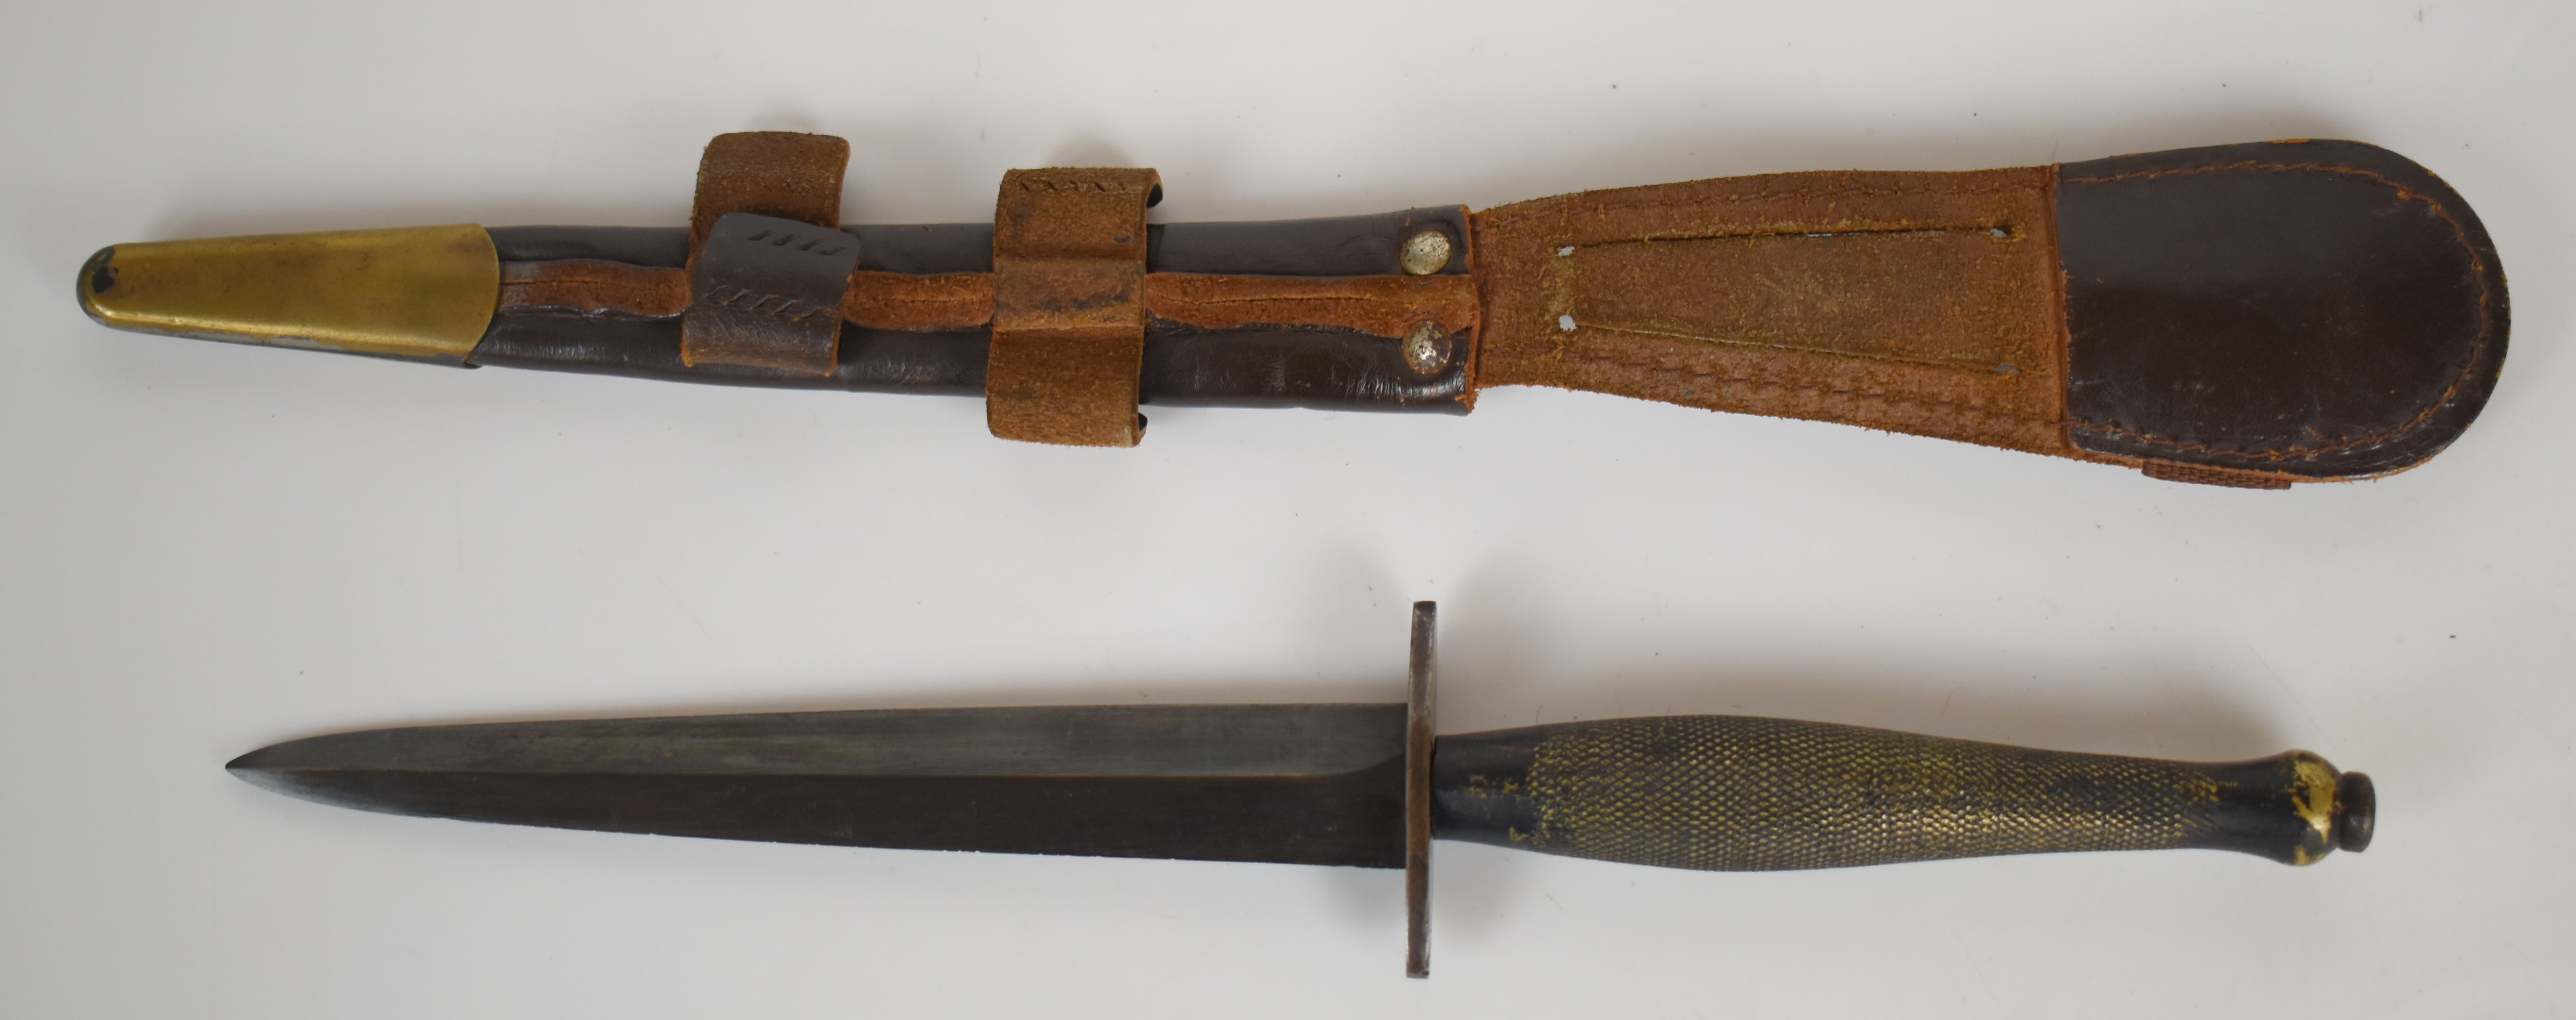 British WW2 Fairbairn Sykes 2nd pattern fighting knife stamped 82 to cross guard, with 16cm blade - Image 2 of 4